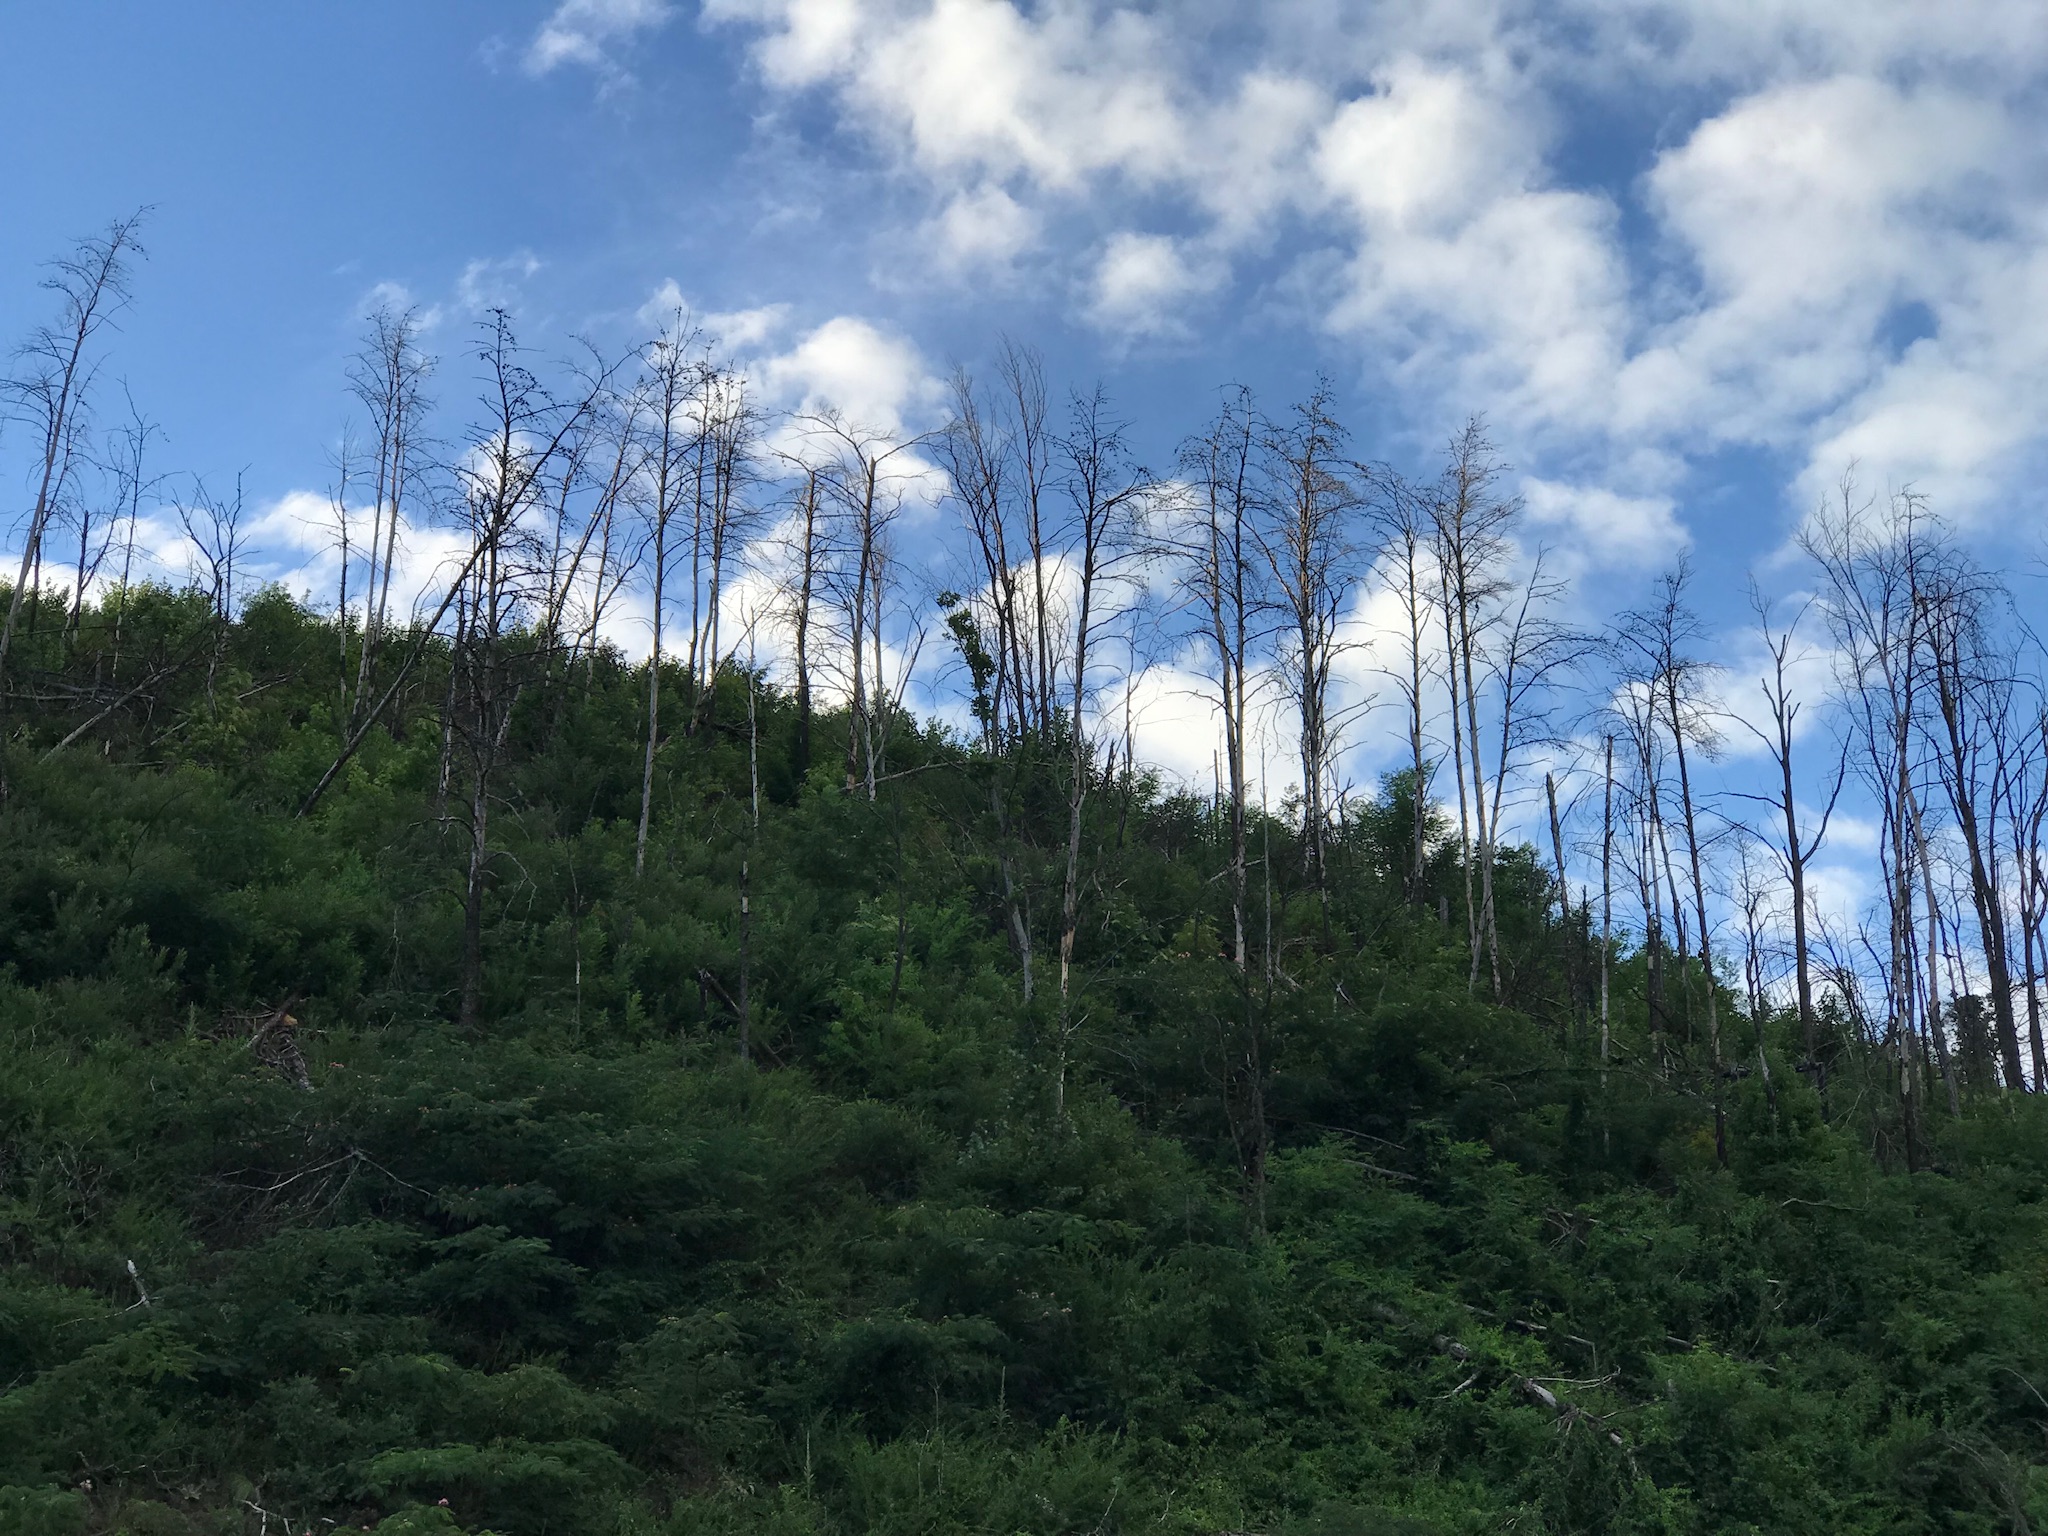 The dead trees on the Gatlinburg Bypass in the Great Smoky Mountains National Park.  Photo taken by and the property of FourWalls.